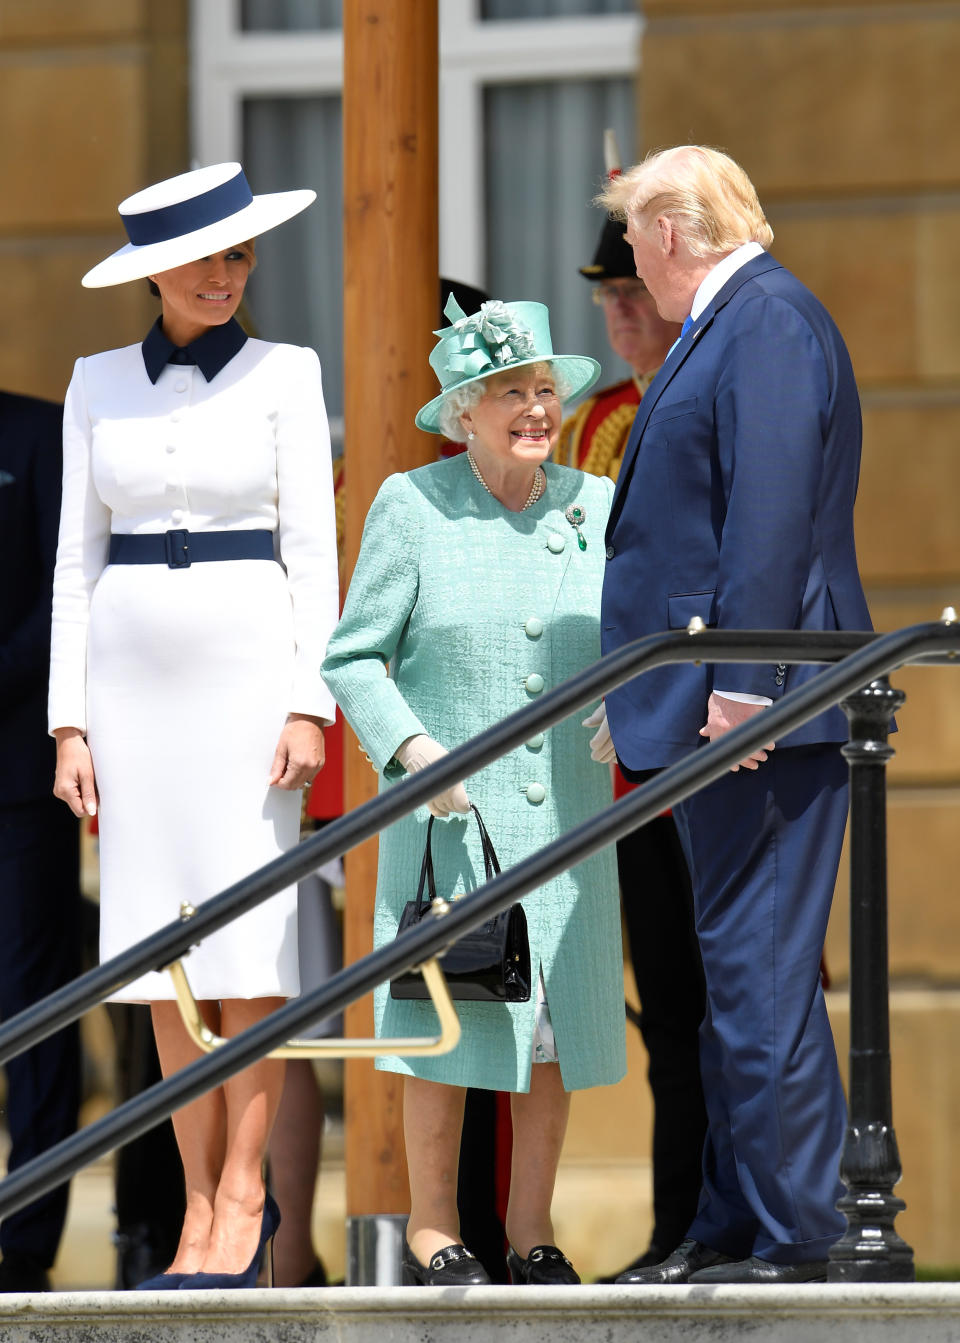 U.S. President Donald Trump and First Lady Melania Trump meet with Britain's Queen Elizabeth at Buckingham Palace, in London, Britain, June 3, 2019. REUTERS/Toby Melville/Pool